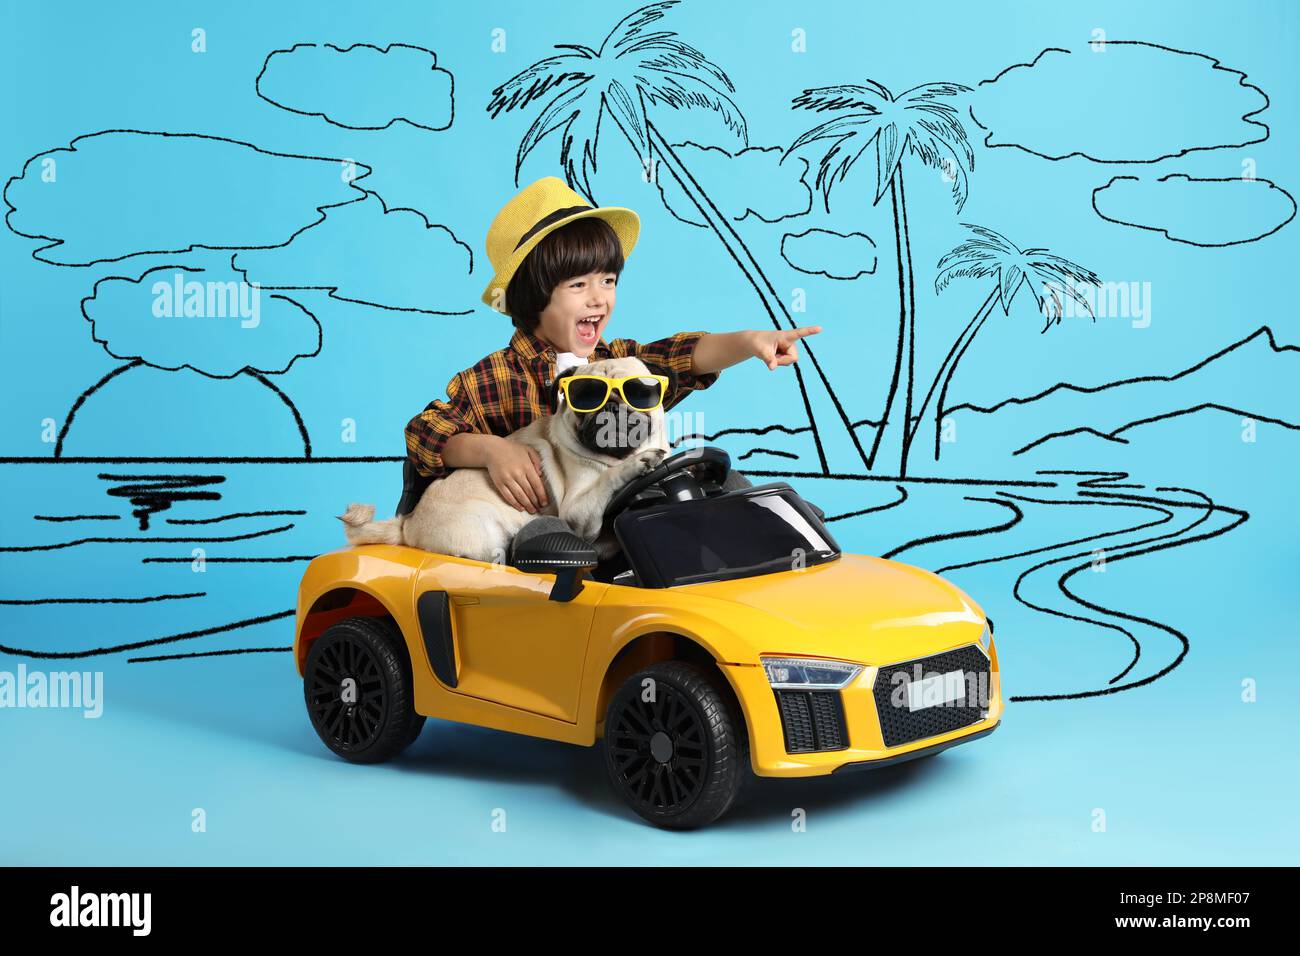 Cute little boy with his dog in toy car and drawing of tropical resort